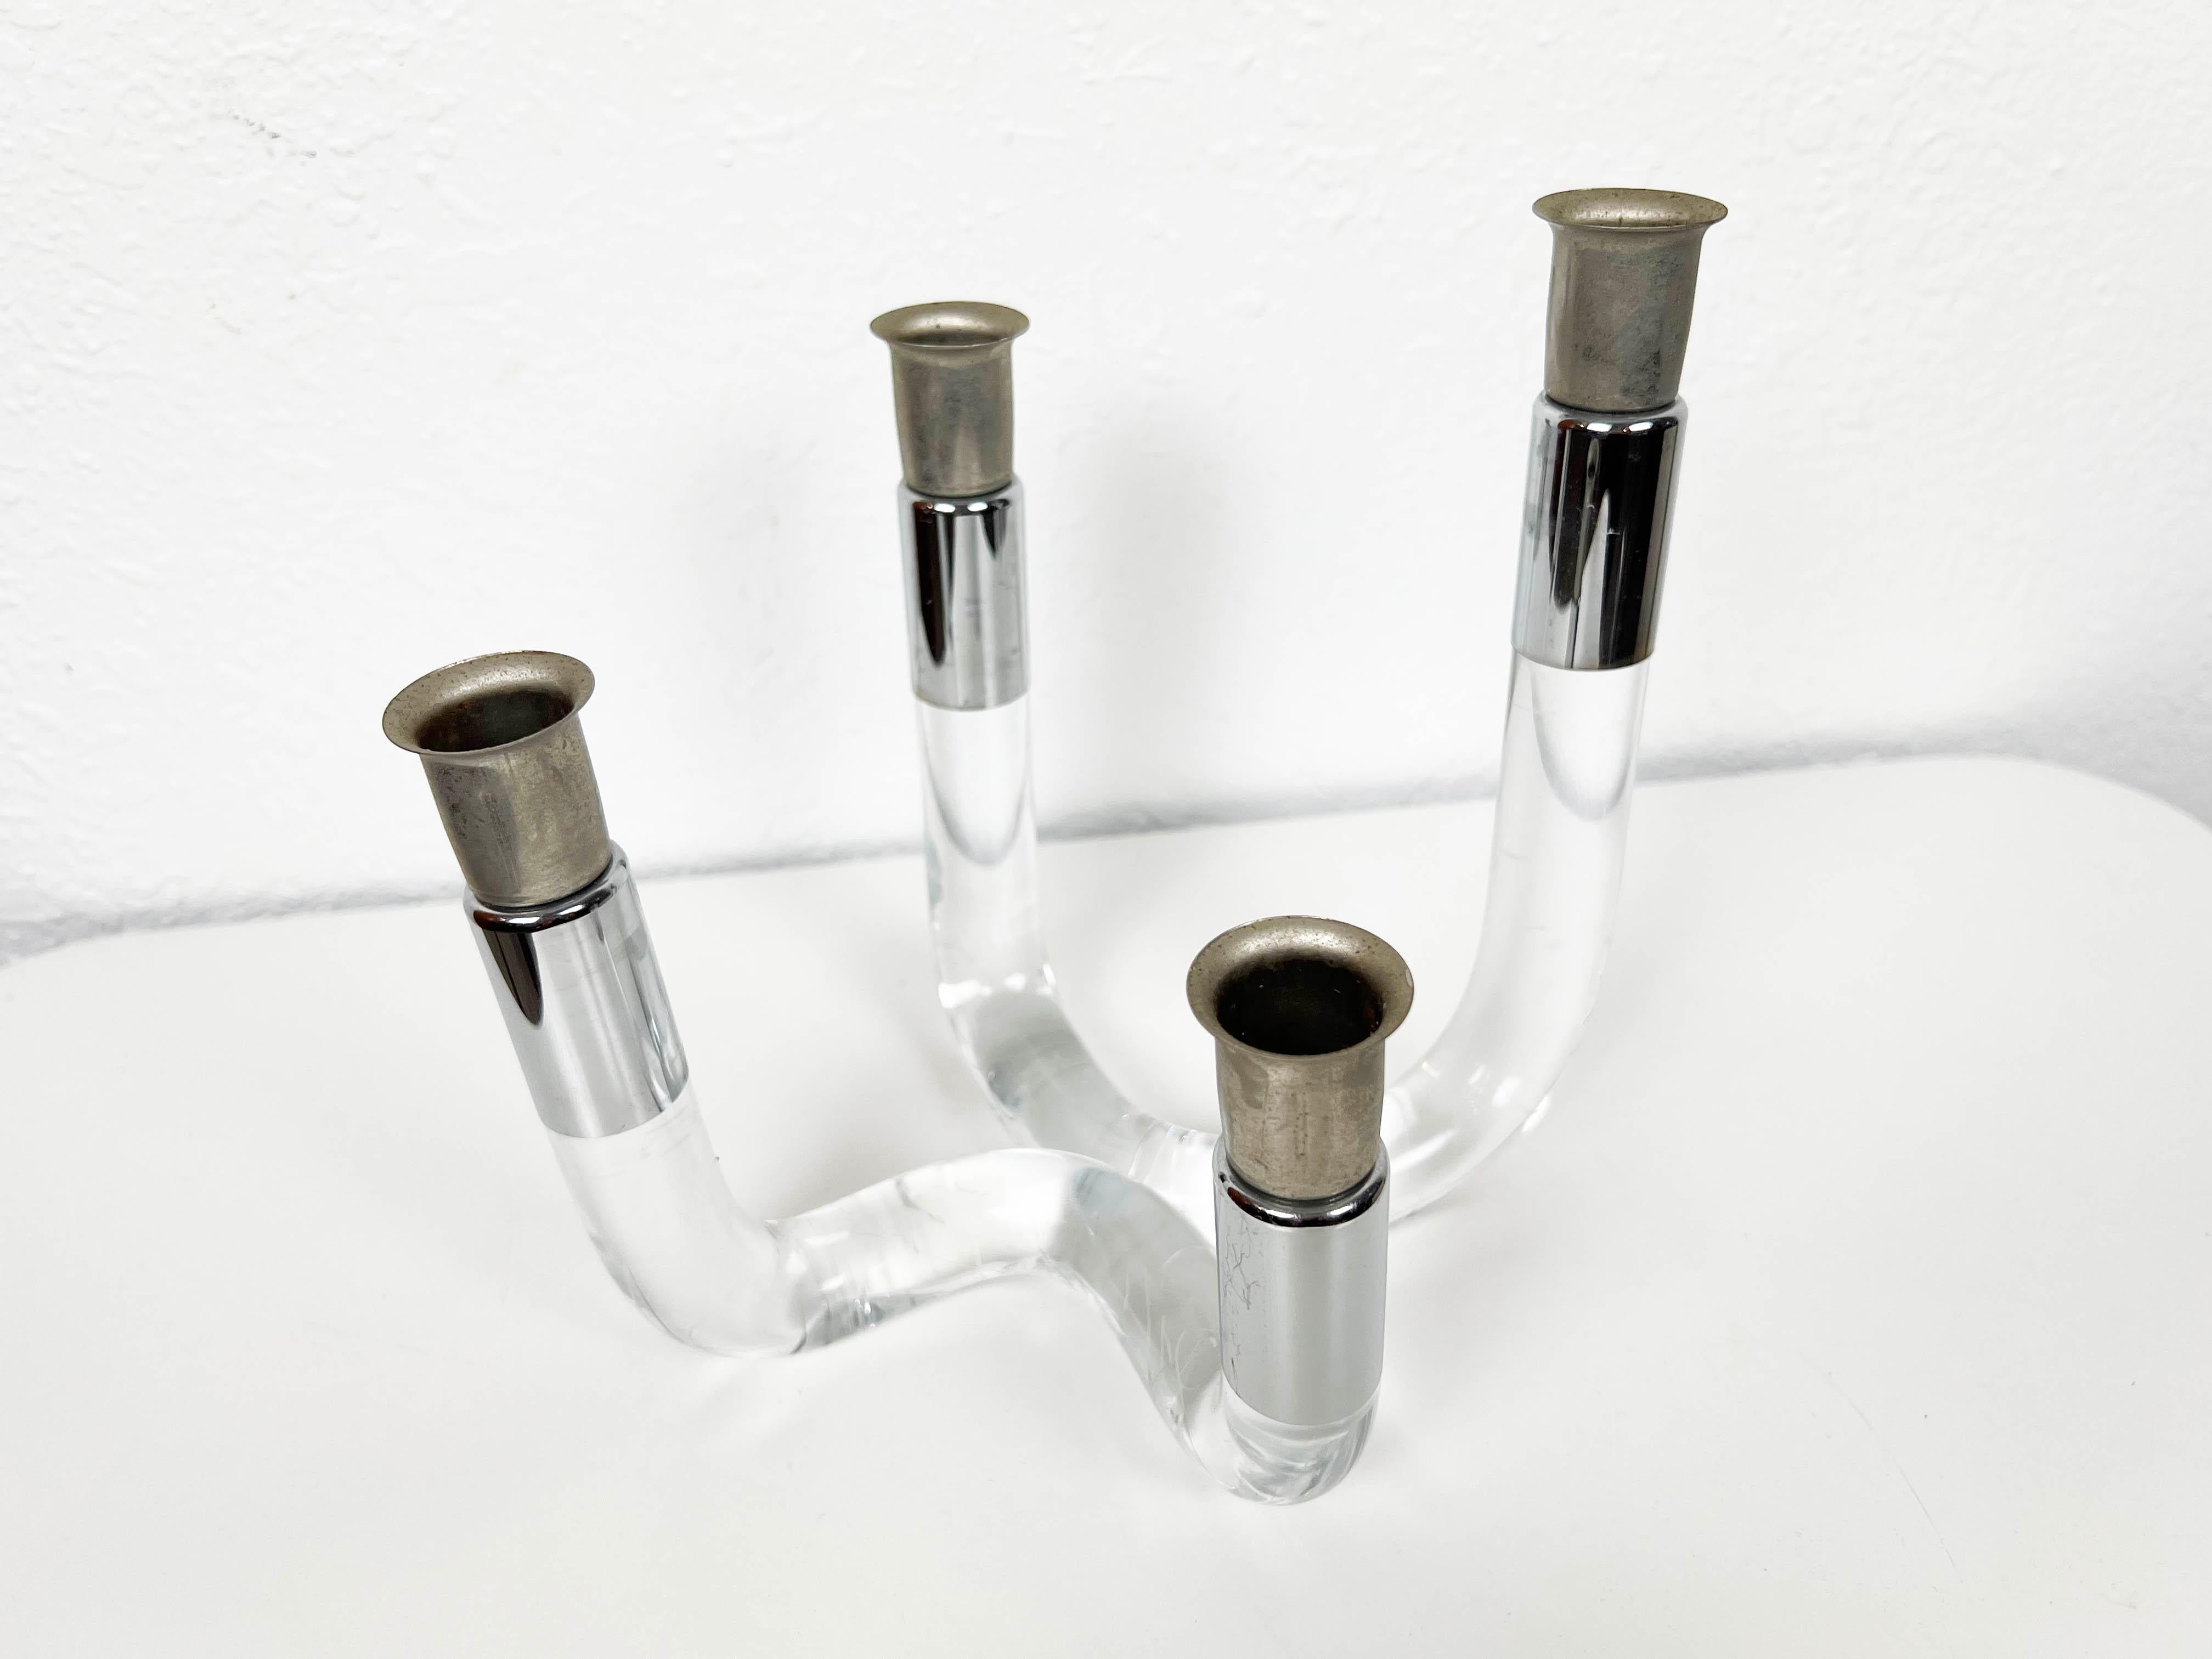 Vintage lucite and chrome candelabra with 4 varied height candlesticks. 

Year: 1970s

Style: Mid-Century Modern

Dimensions: 8